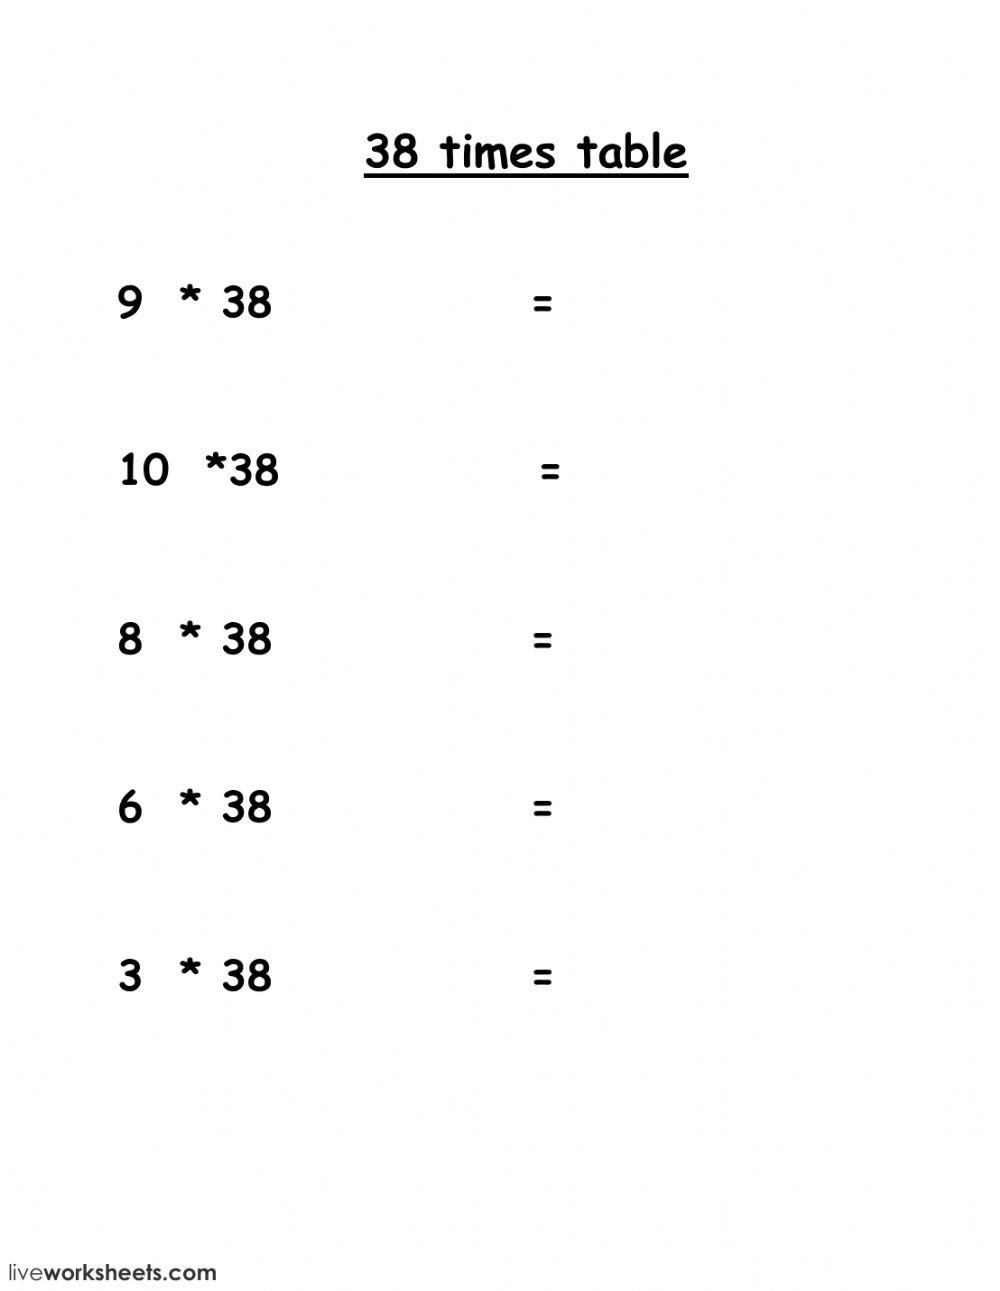 38 times table